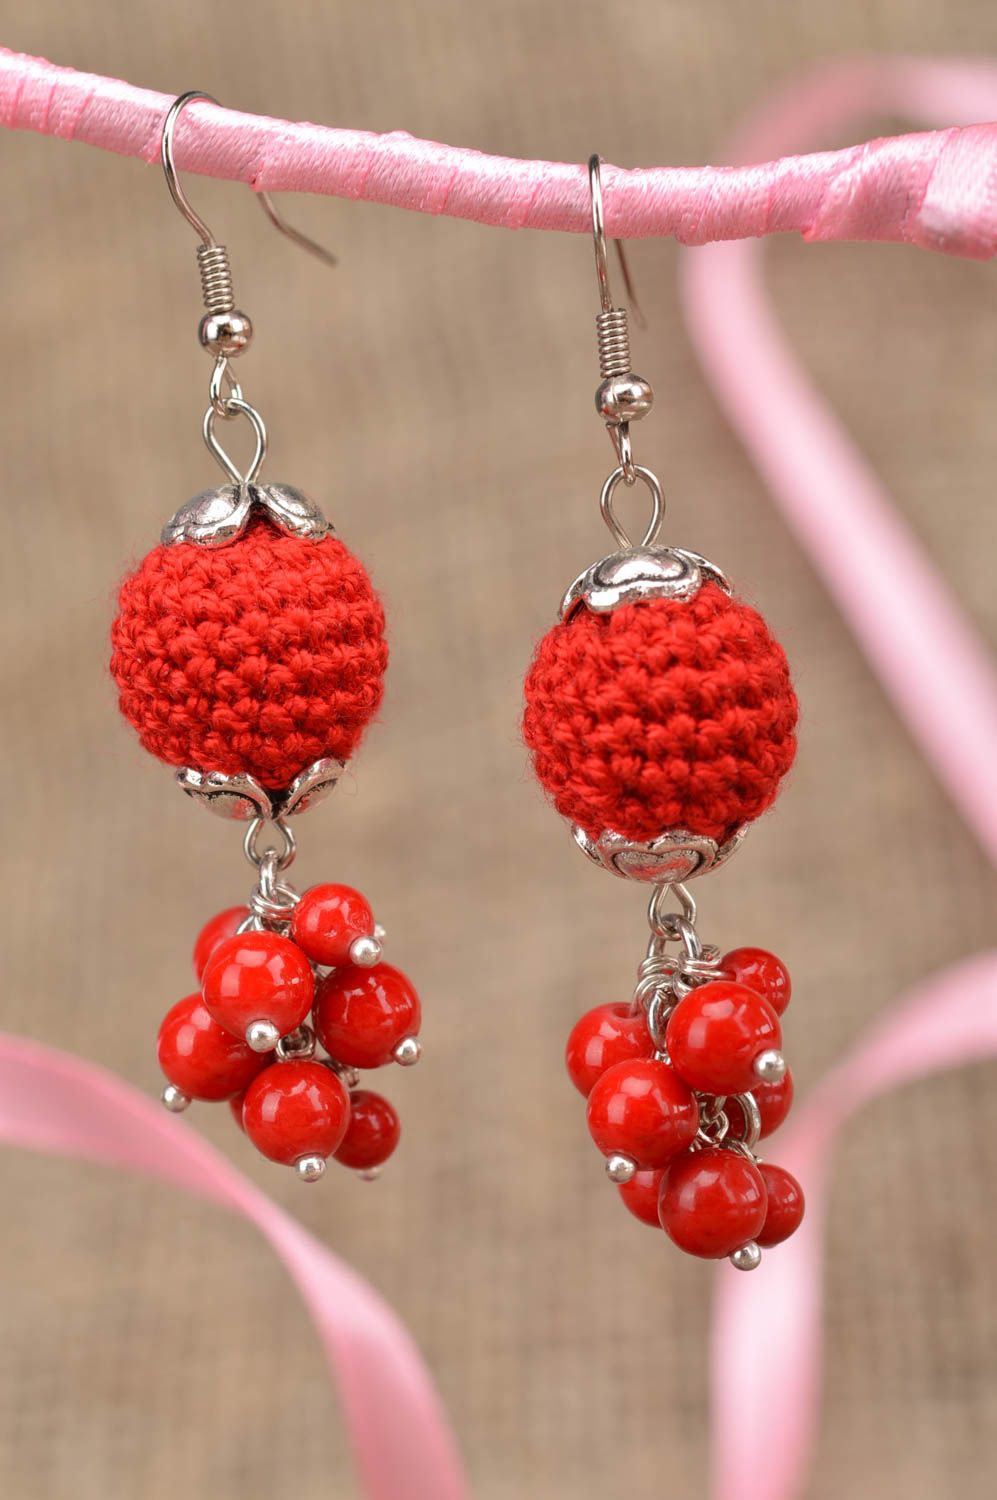 Designer earrings with red crocheted over beads handmade stylish accessory photo 1